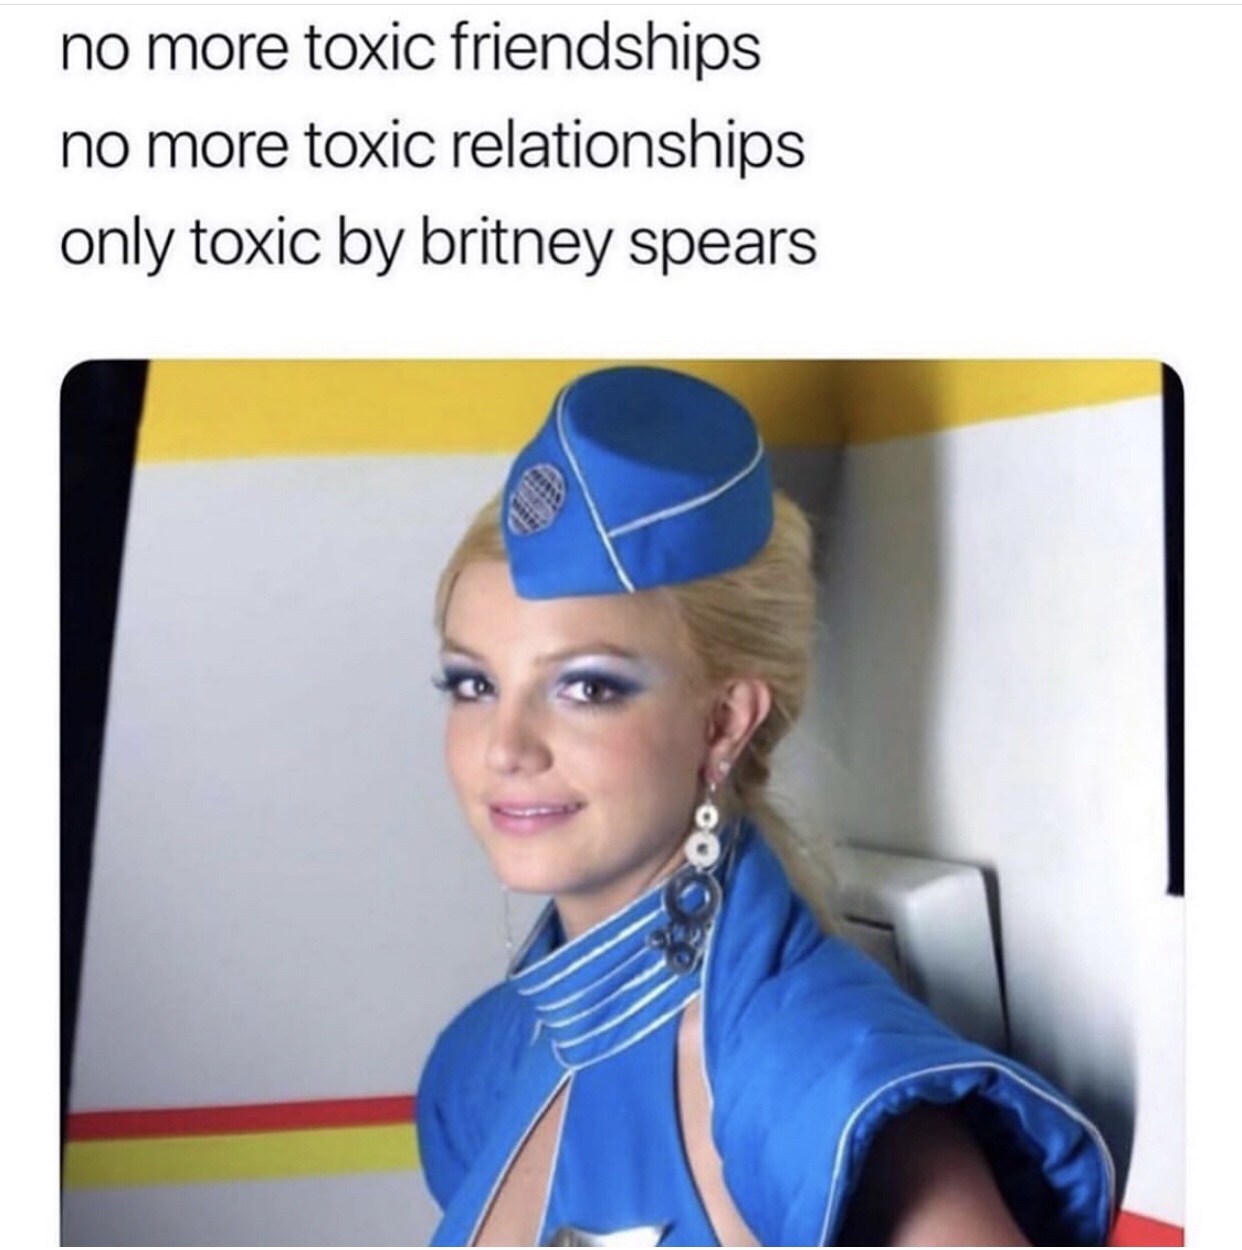 britney spears toxic - no more toxic friendships no more toxic relationships only toxic by britney spears